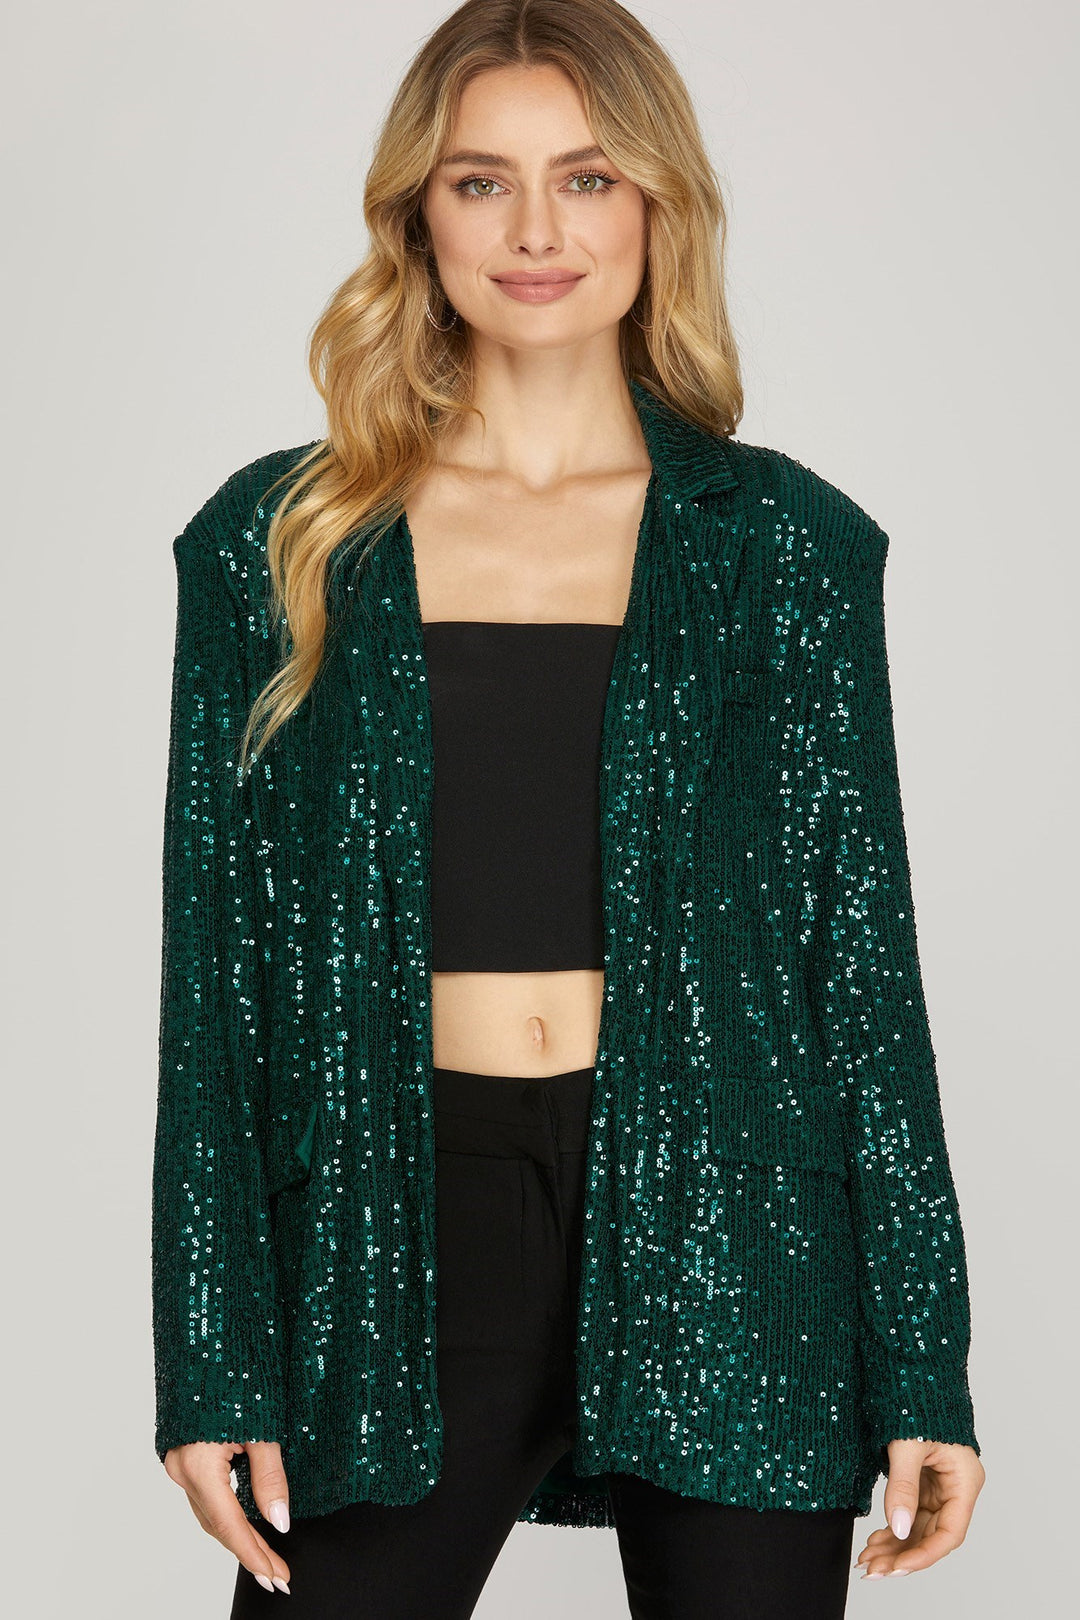 Jasmine Single Button Sequin Blazer, Sea Green-Outerwear-Inspired by Justeen-Women's Clothing Boutique in Chicago, Illinois